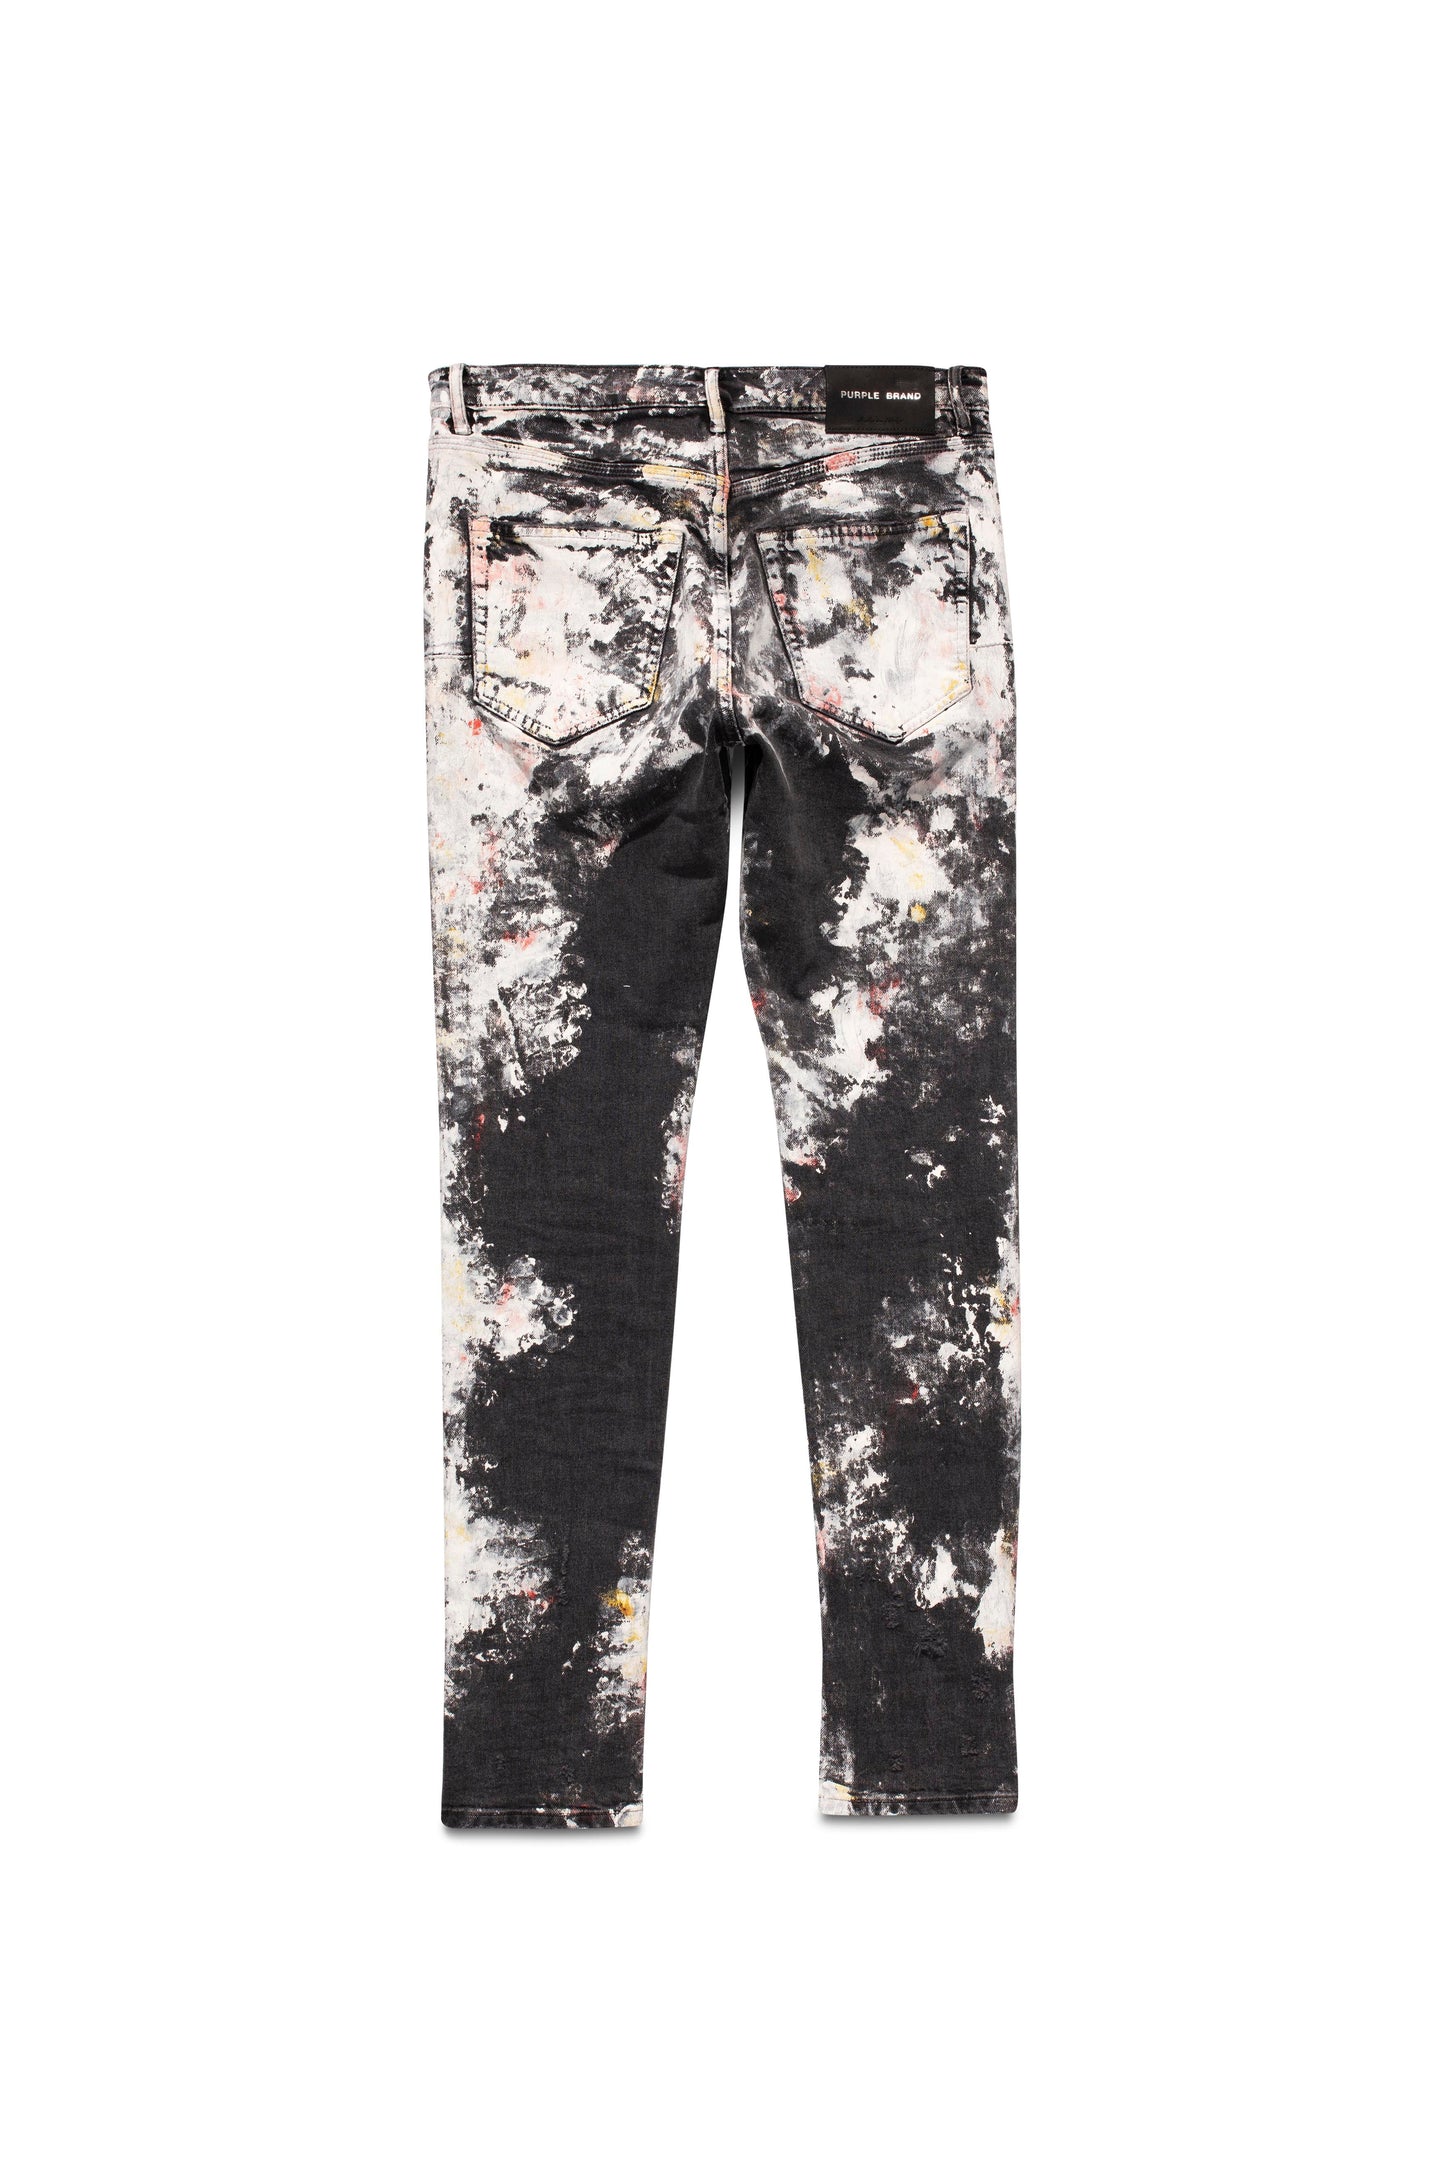 P001 LOW RISE SKINNY JEAN - Heavy Paint Over Black